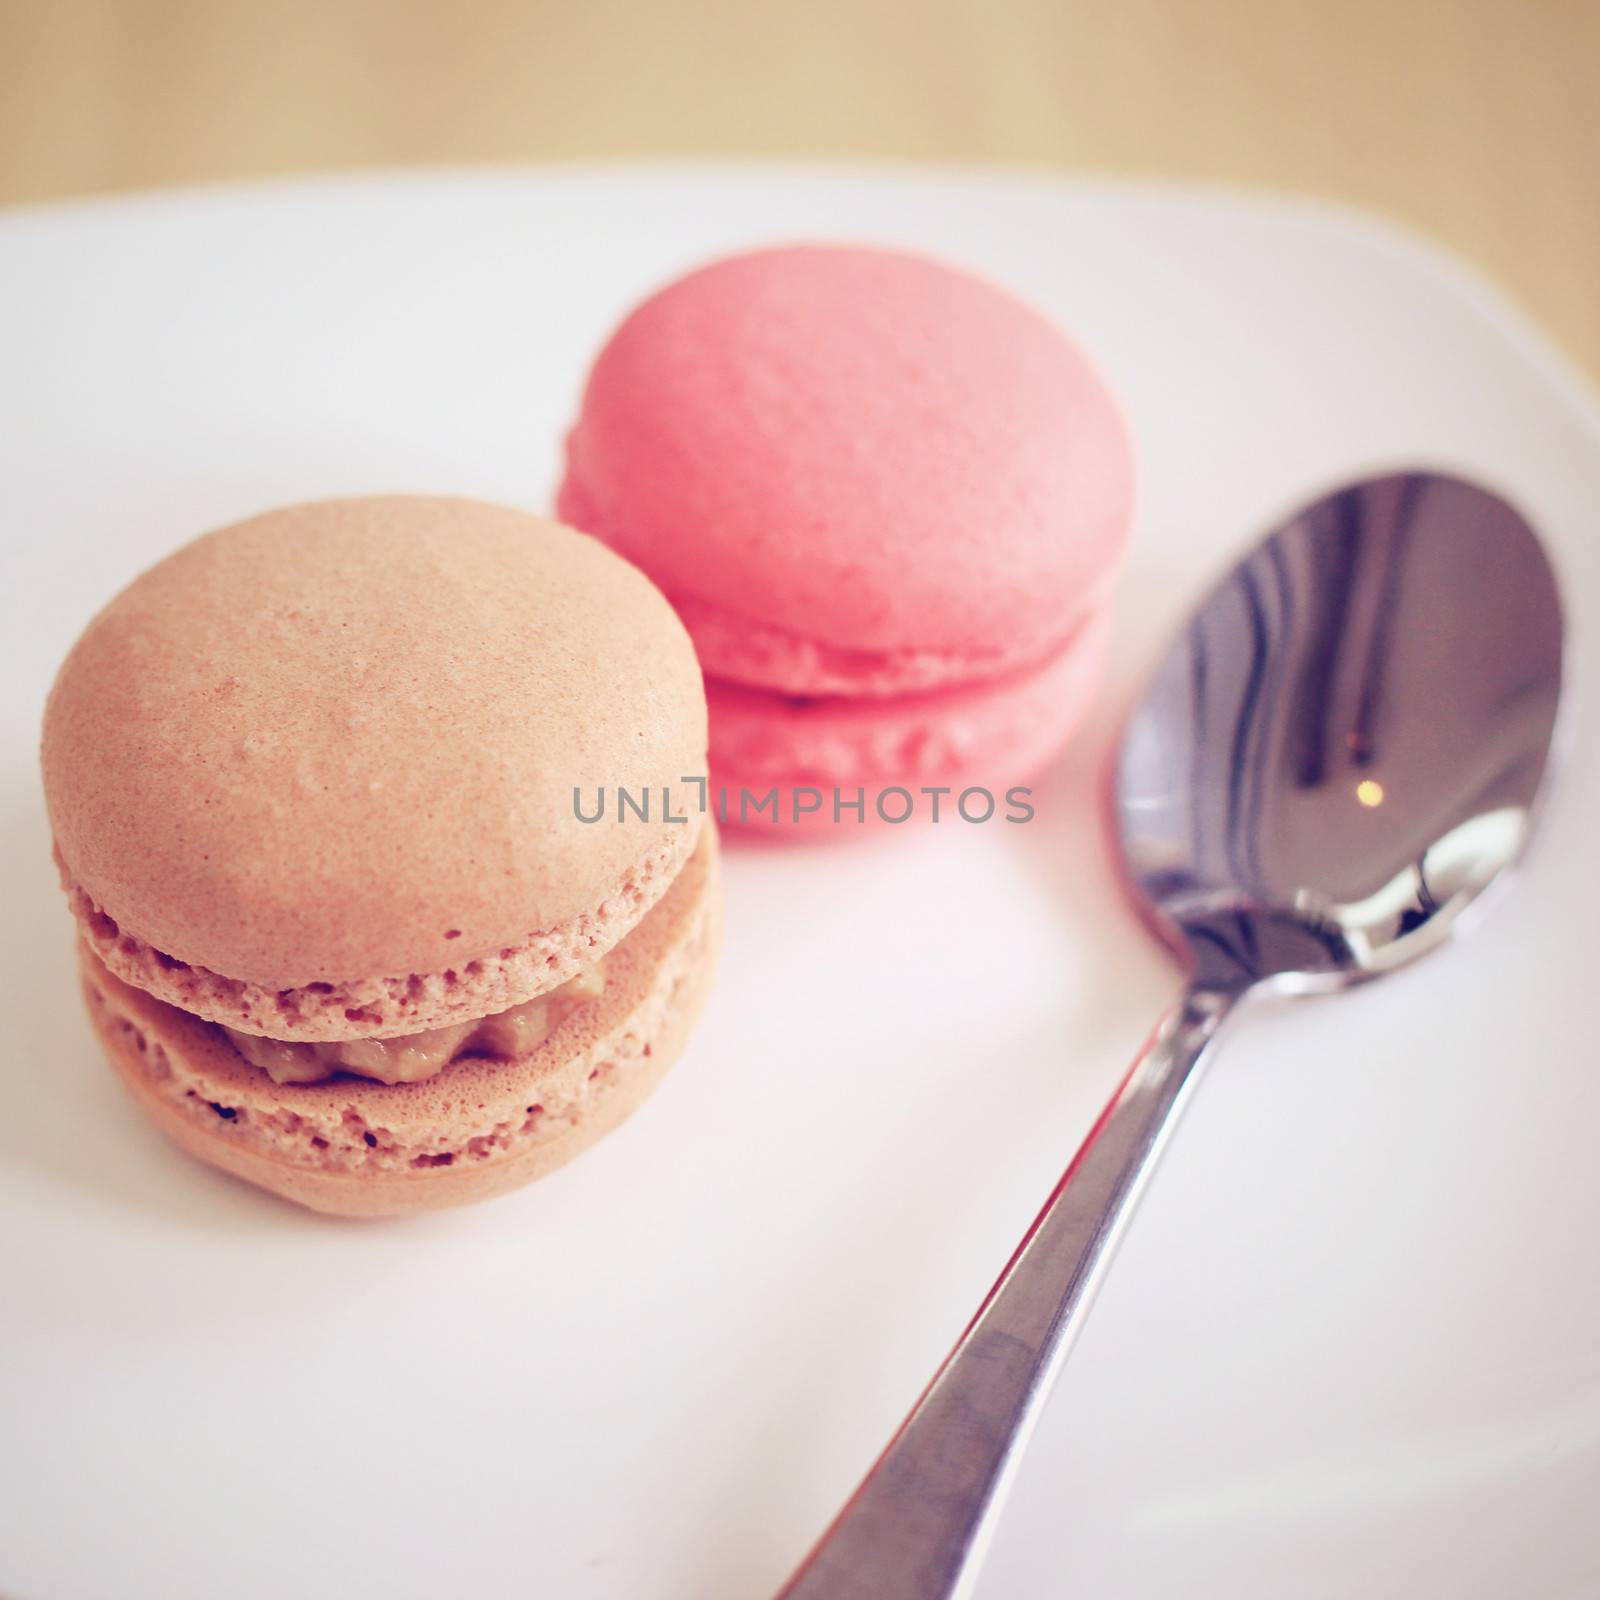 Tasty sweet macaron with spoon, retro filter effect by nuchylee